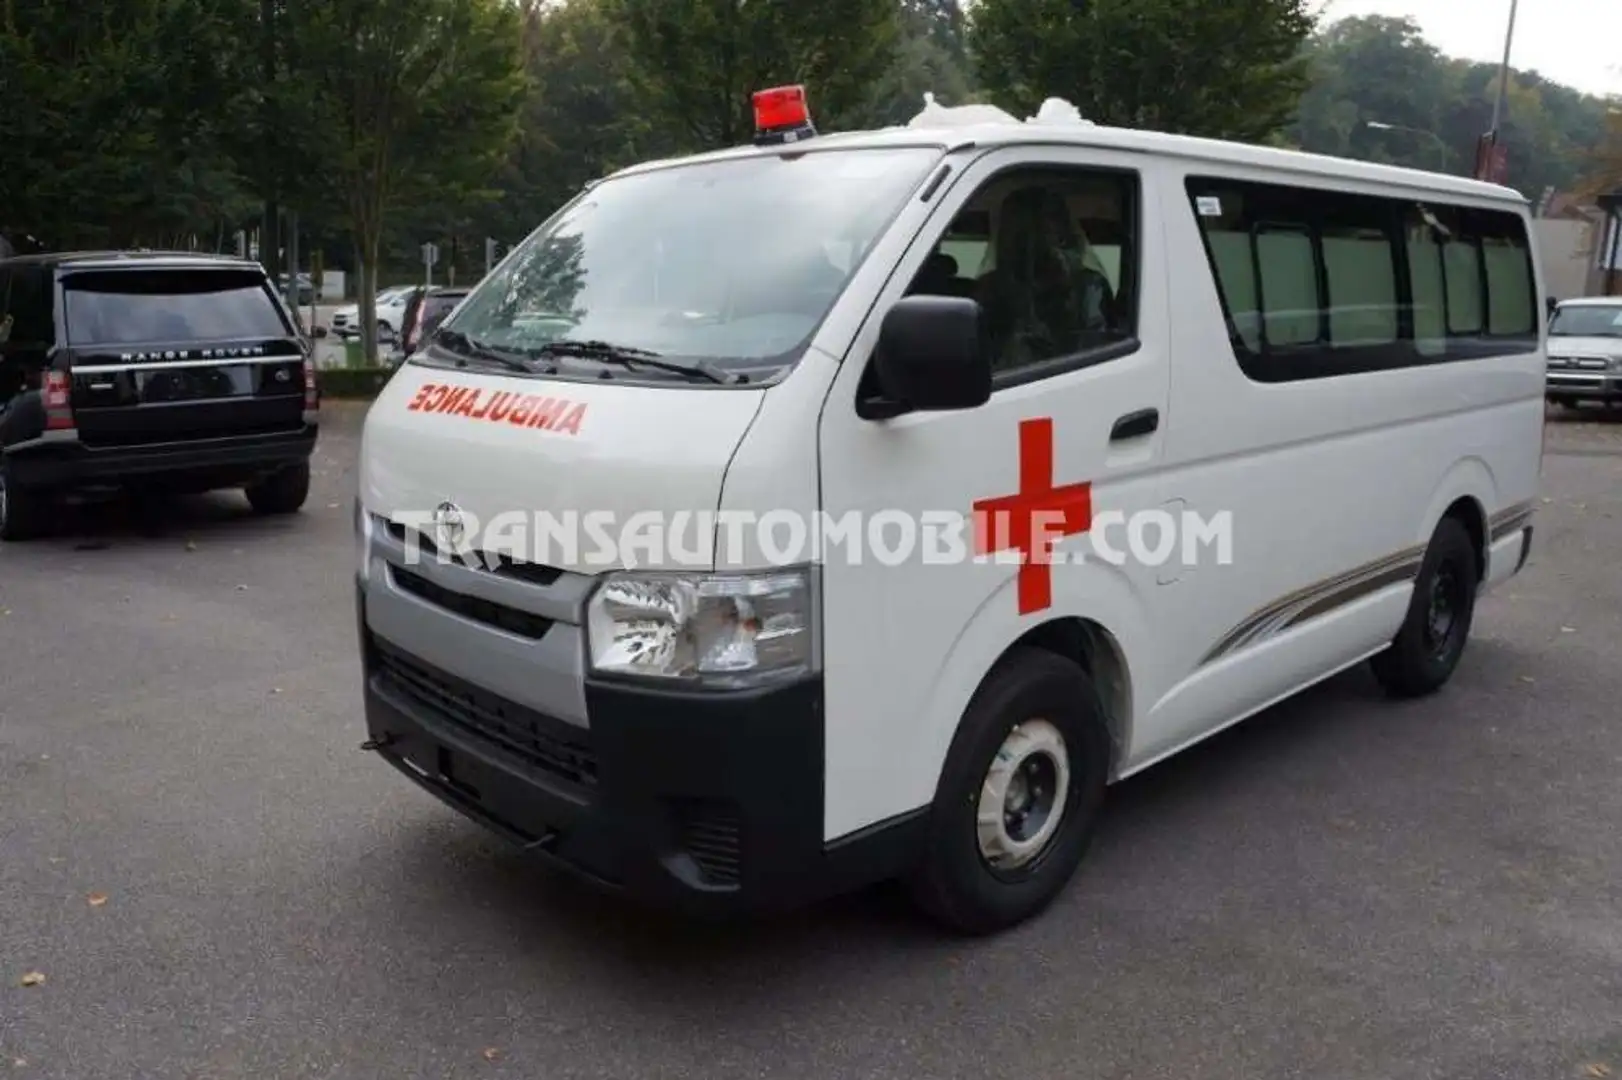 Toyota Hiace STANDARD ROOF  - EXPORT OUT EU TROPICAL VERSION - White - 1